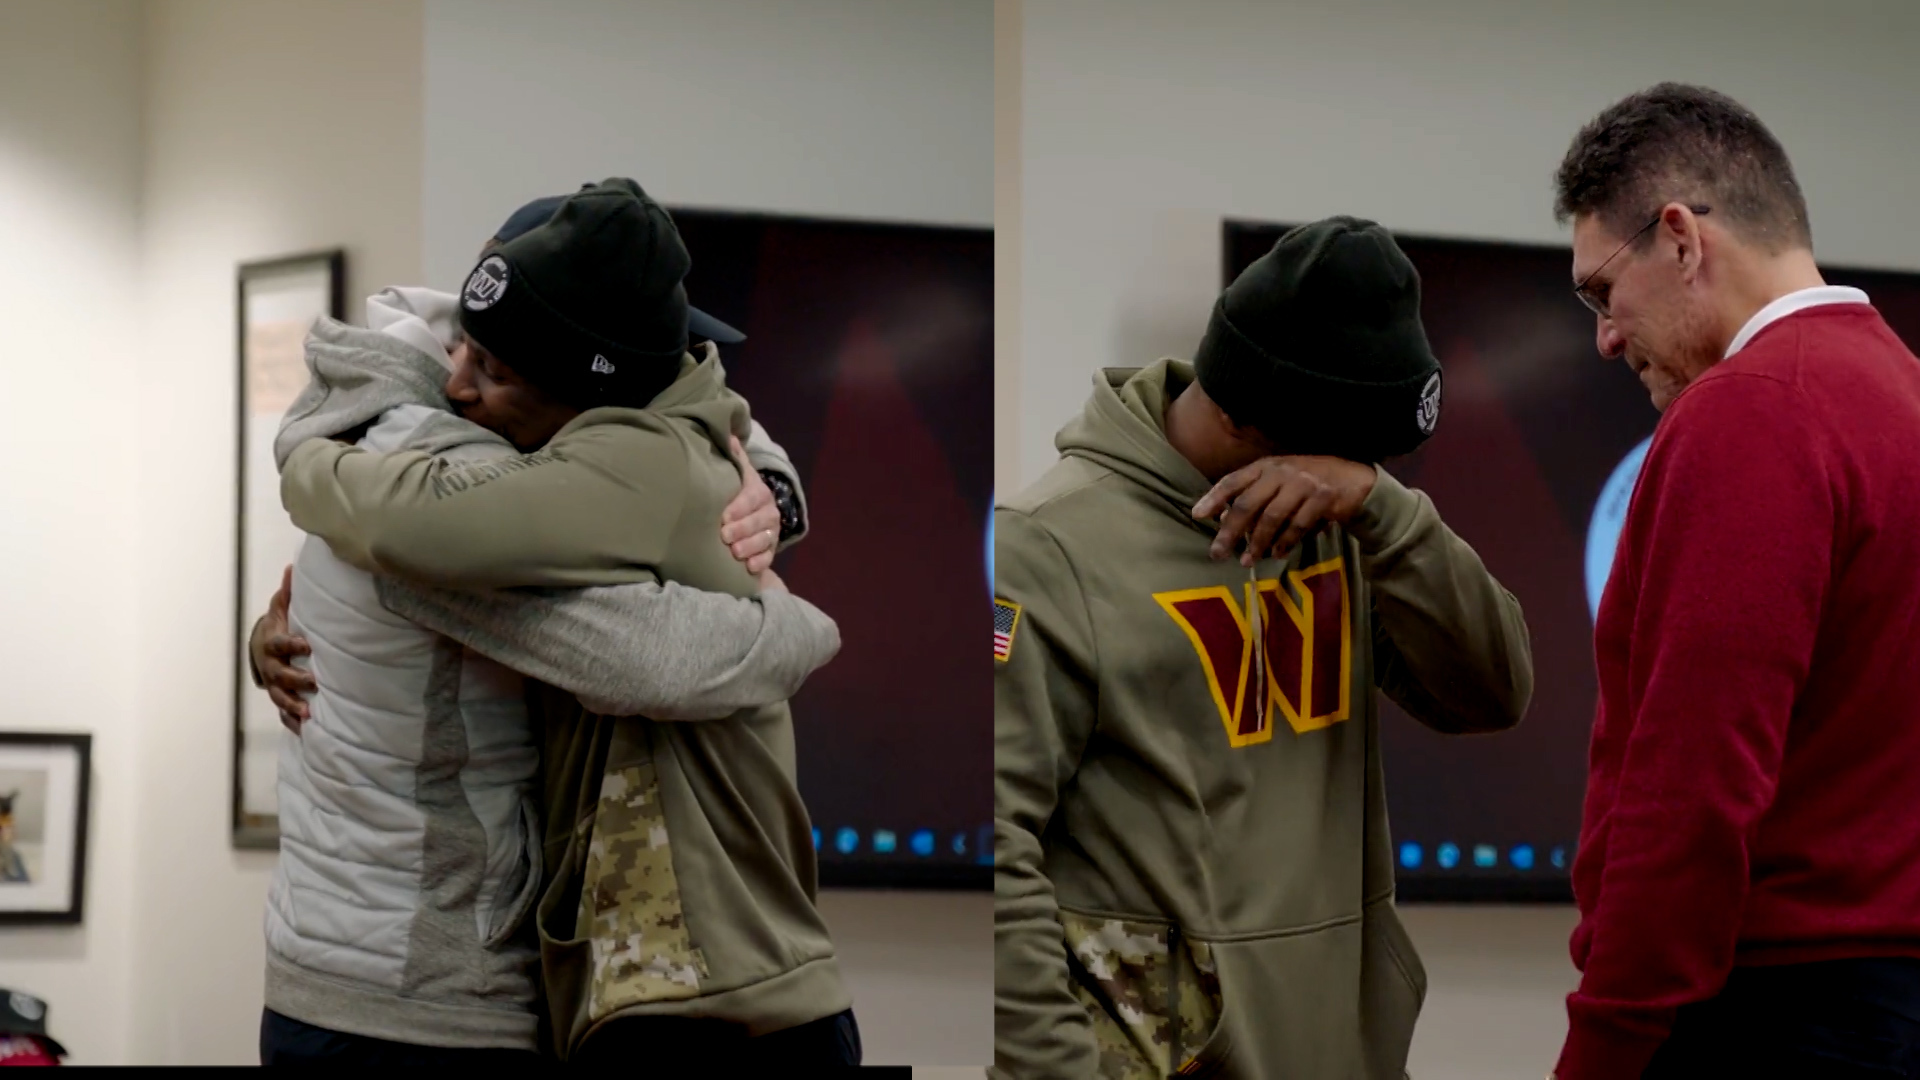 Washington Commanders players get emotional after being selected for first Pro Bowl